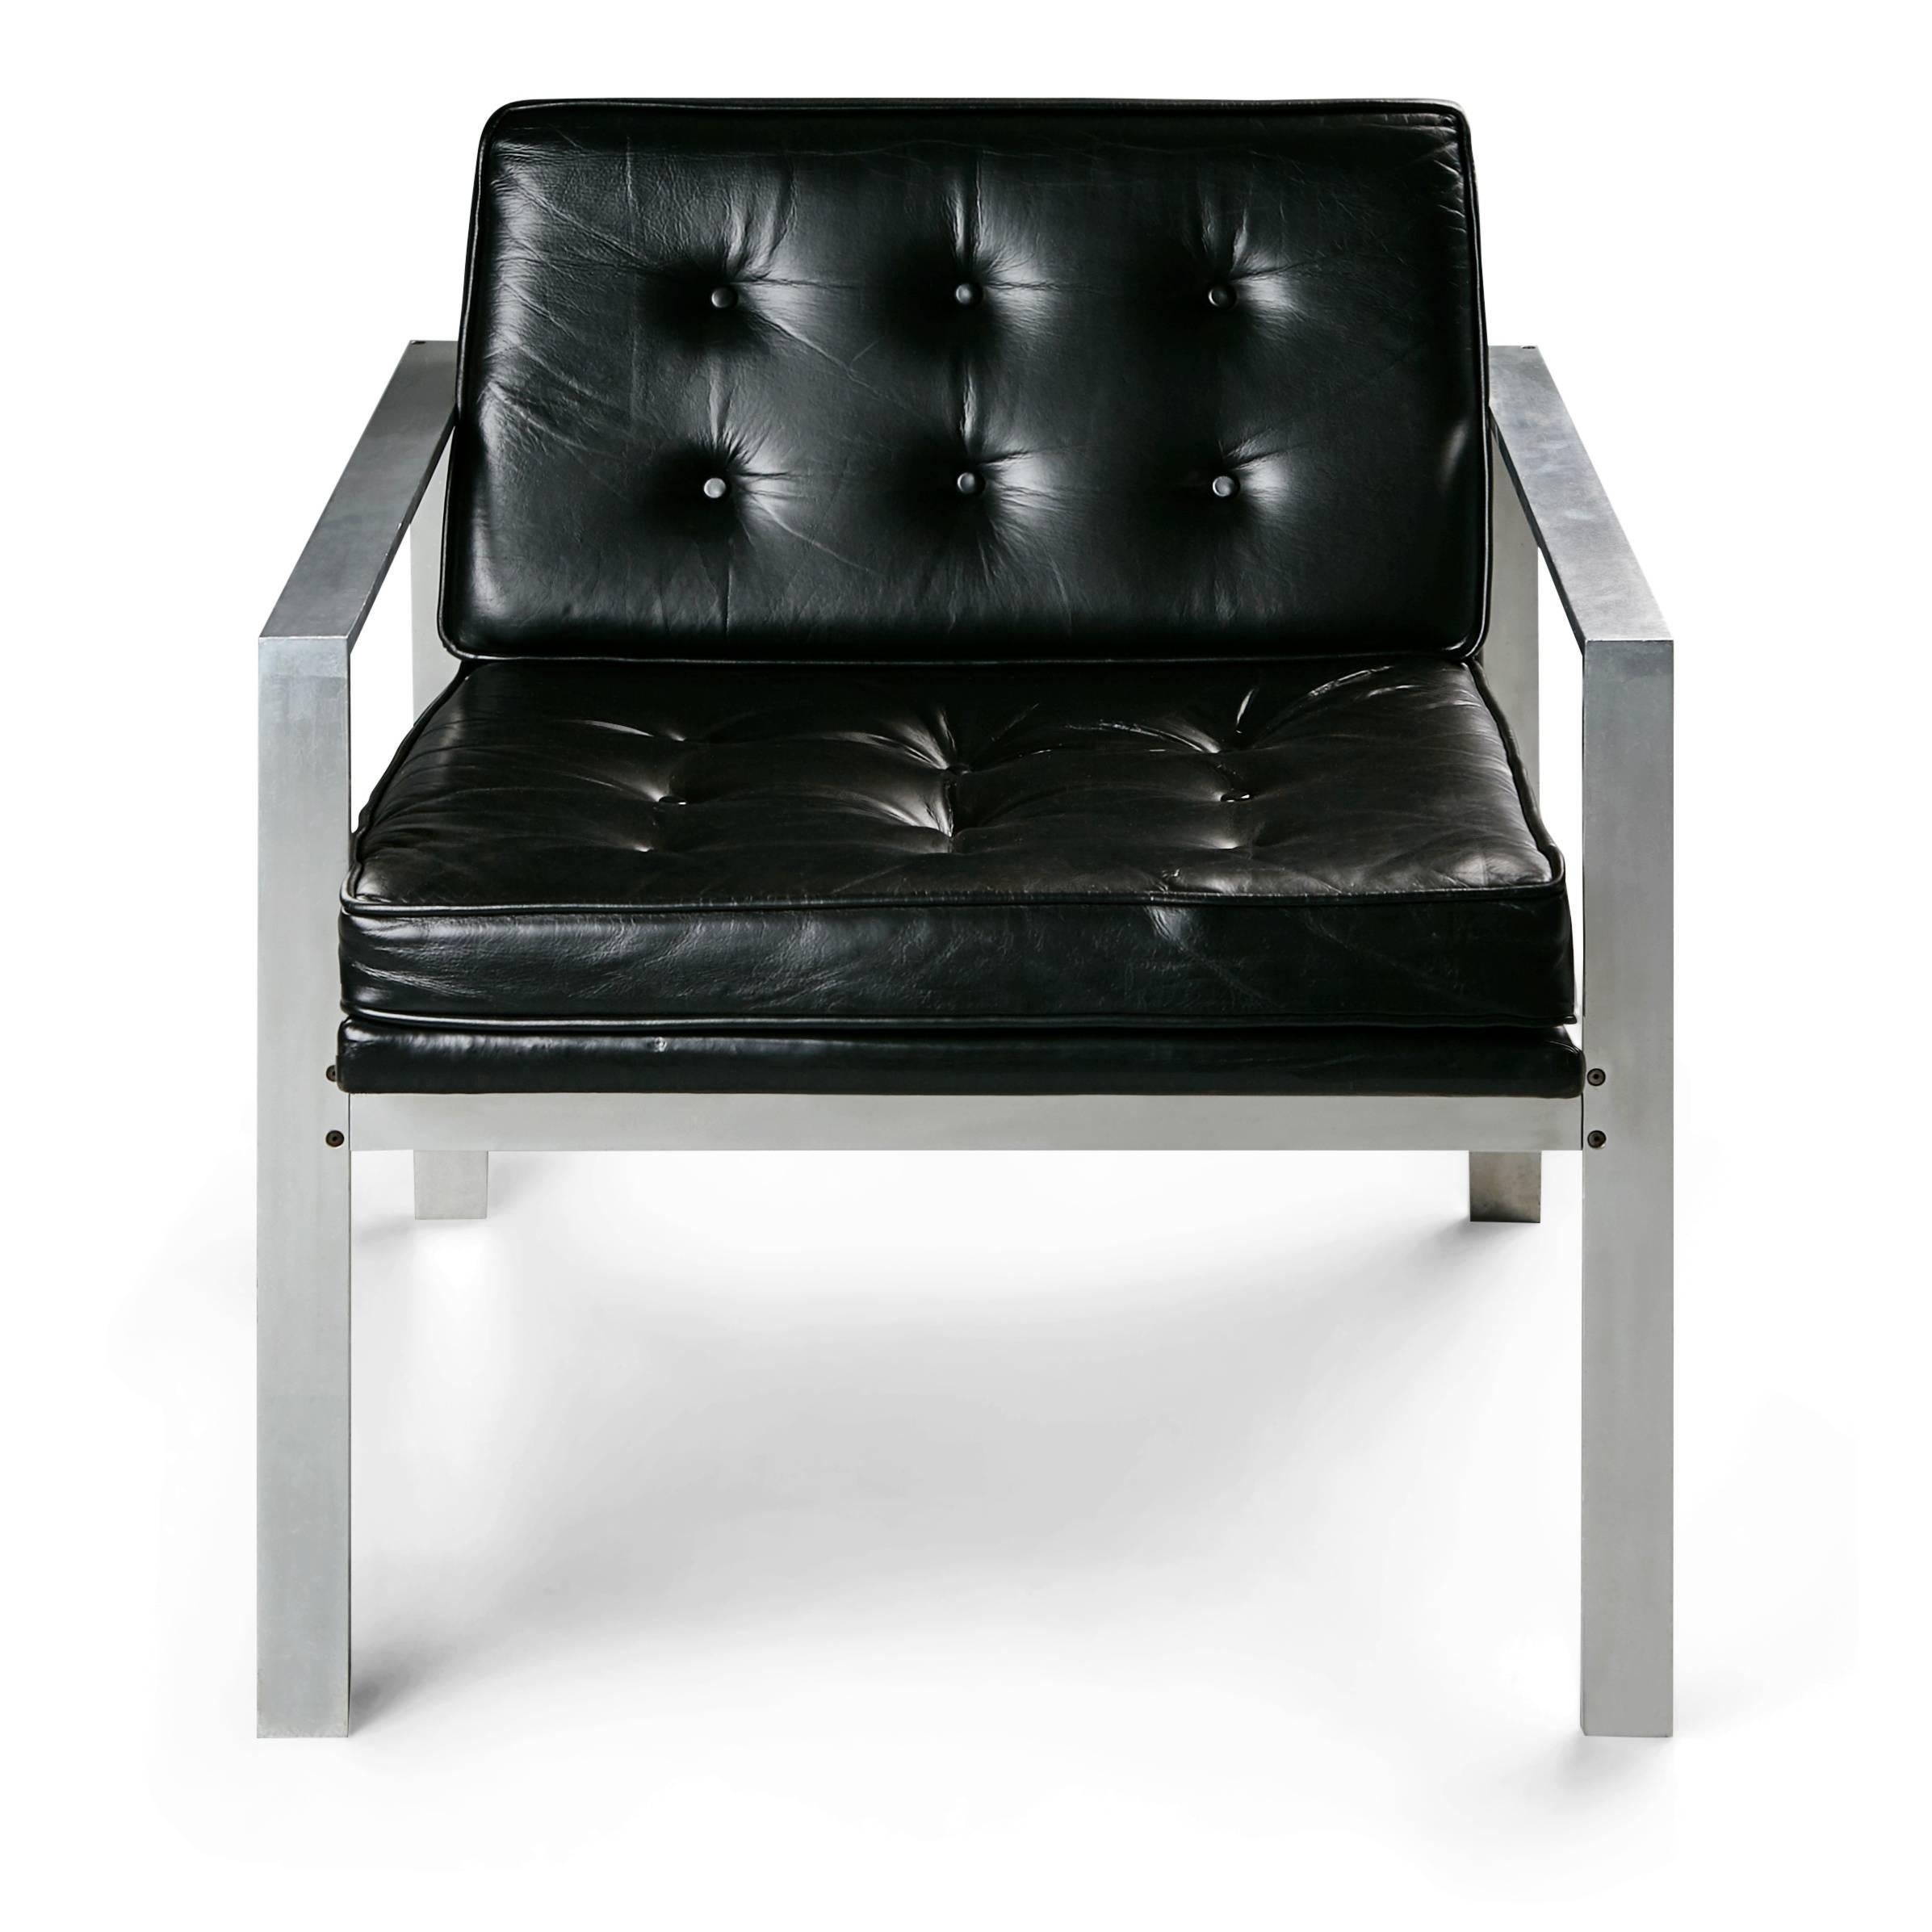 Rare and collectible pair of aluminum armchairs by Harvey Probber, featuring tufted high quality classic black leather upholstered seat cushions and seat back cushions with solid aluminum frames of modern form. These are the authentic Probber chairs